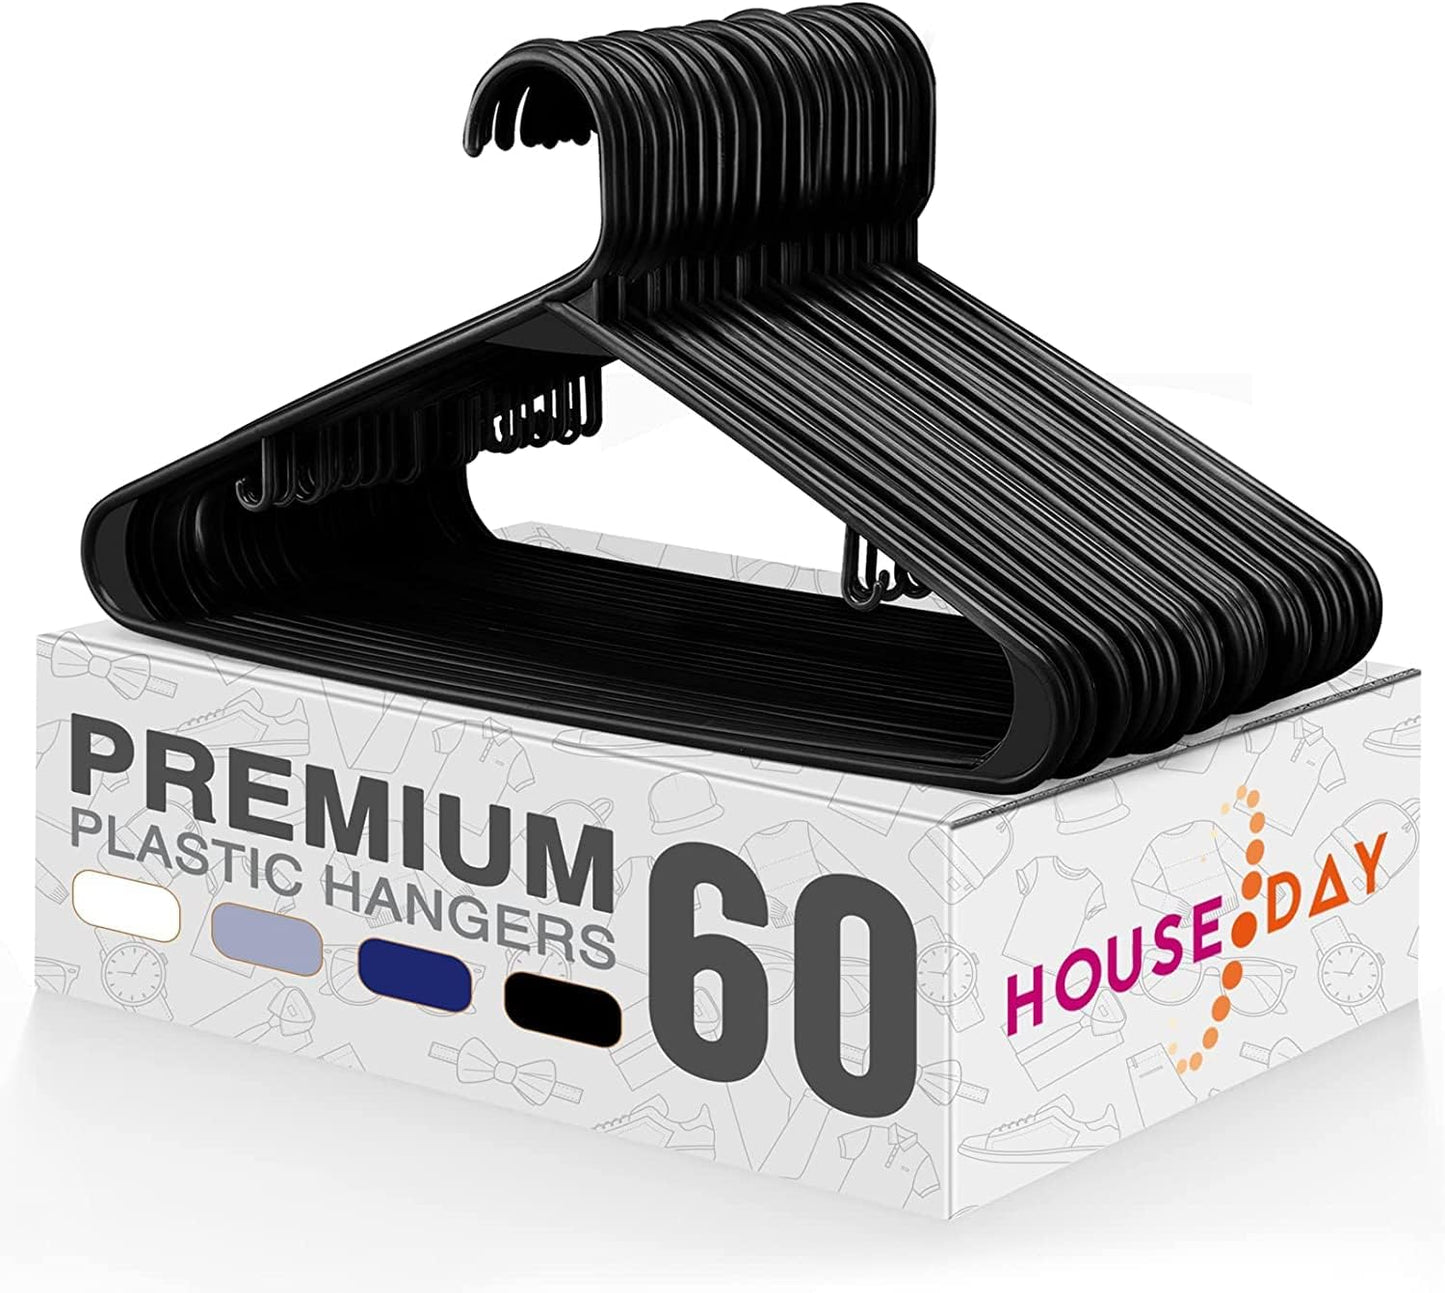 HOUSE DAY 16.5x9.3 Inch Plastic Hangers 60 Pack